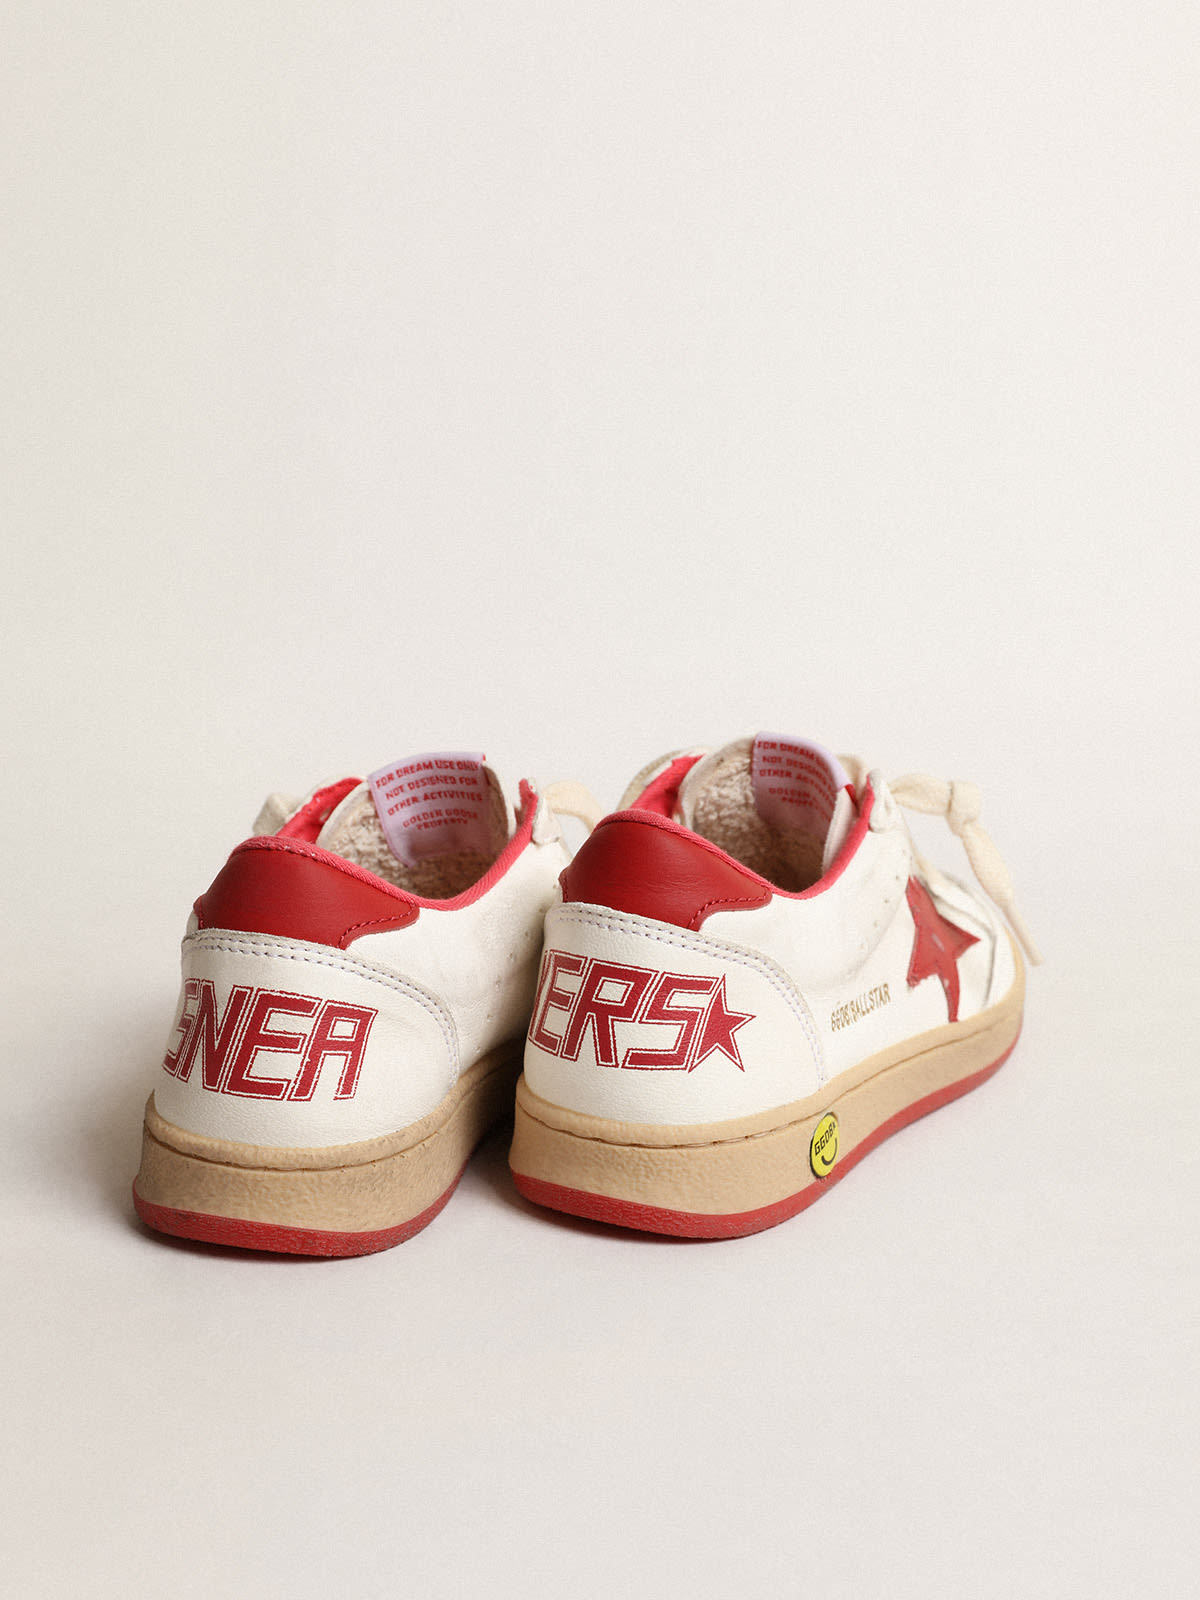 Golden Goose - Ball Star Junior in nappa with red leather star and heel tab in 